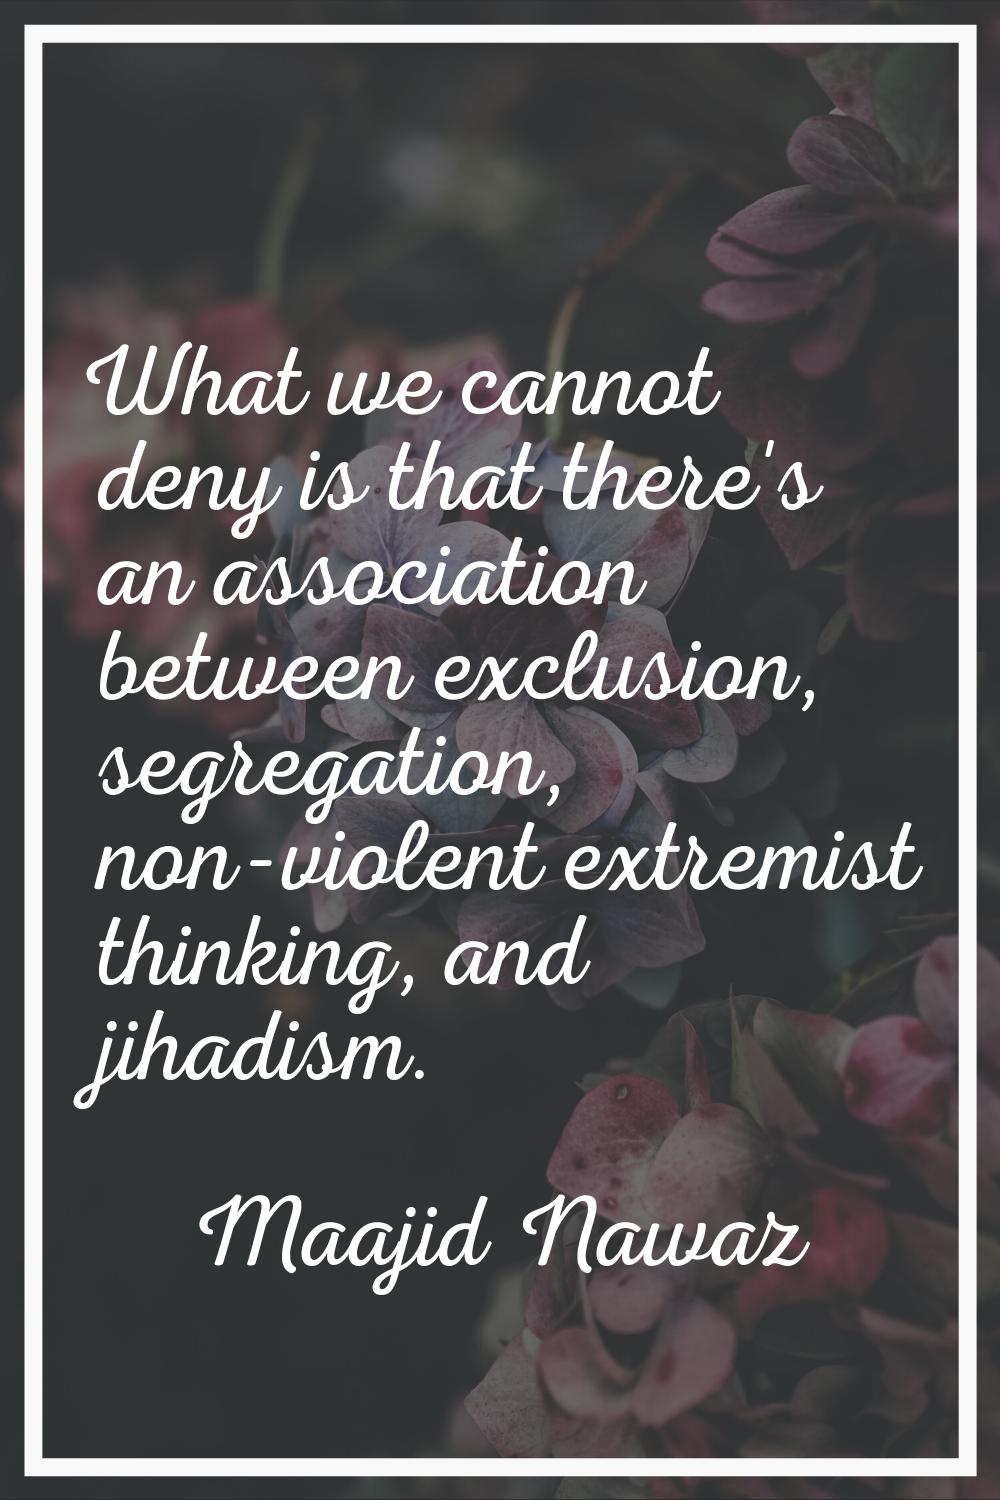 What we cannot deny is that there's an association between exclusion, segregation, non-violent extr